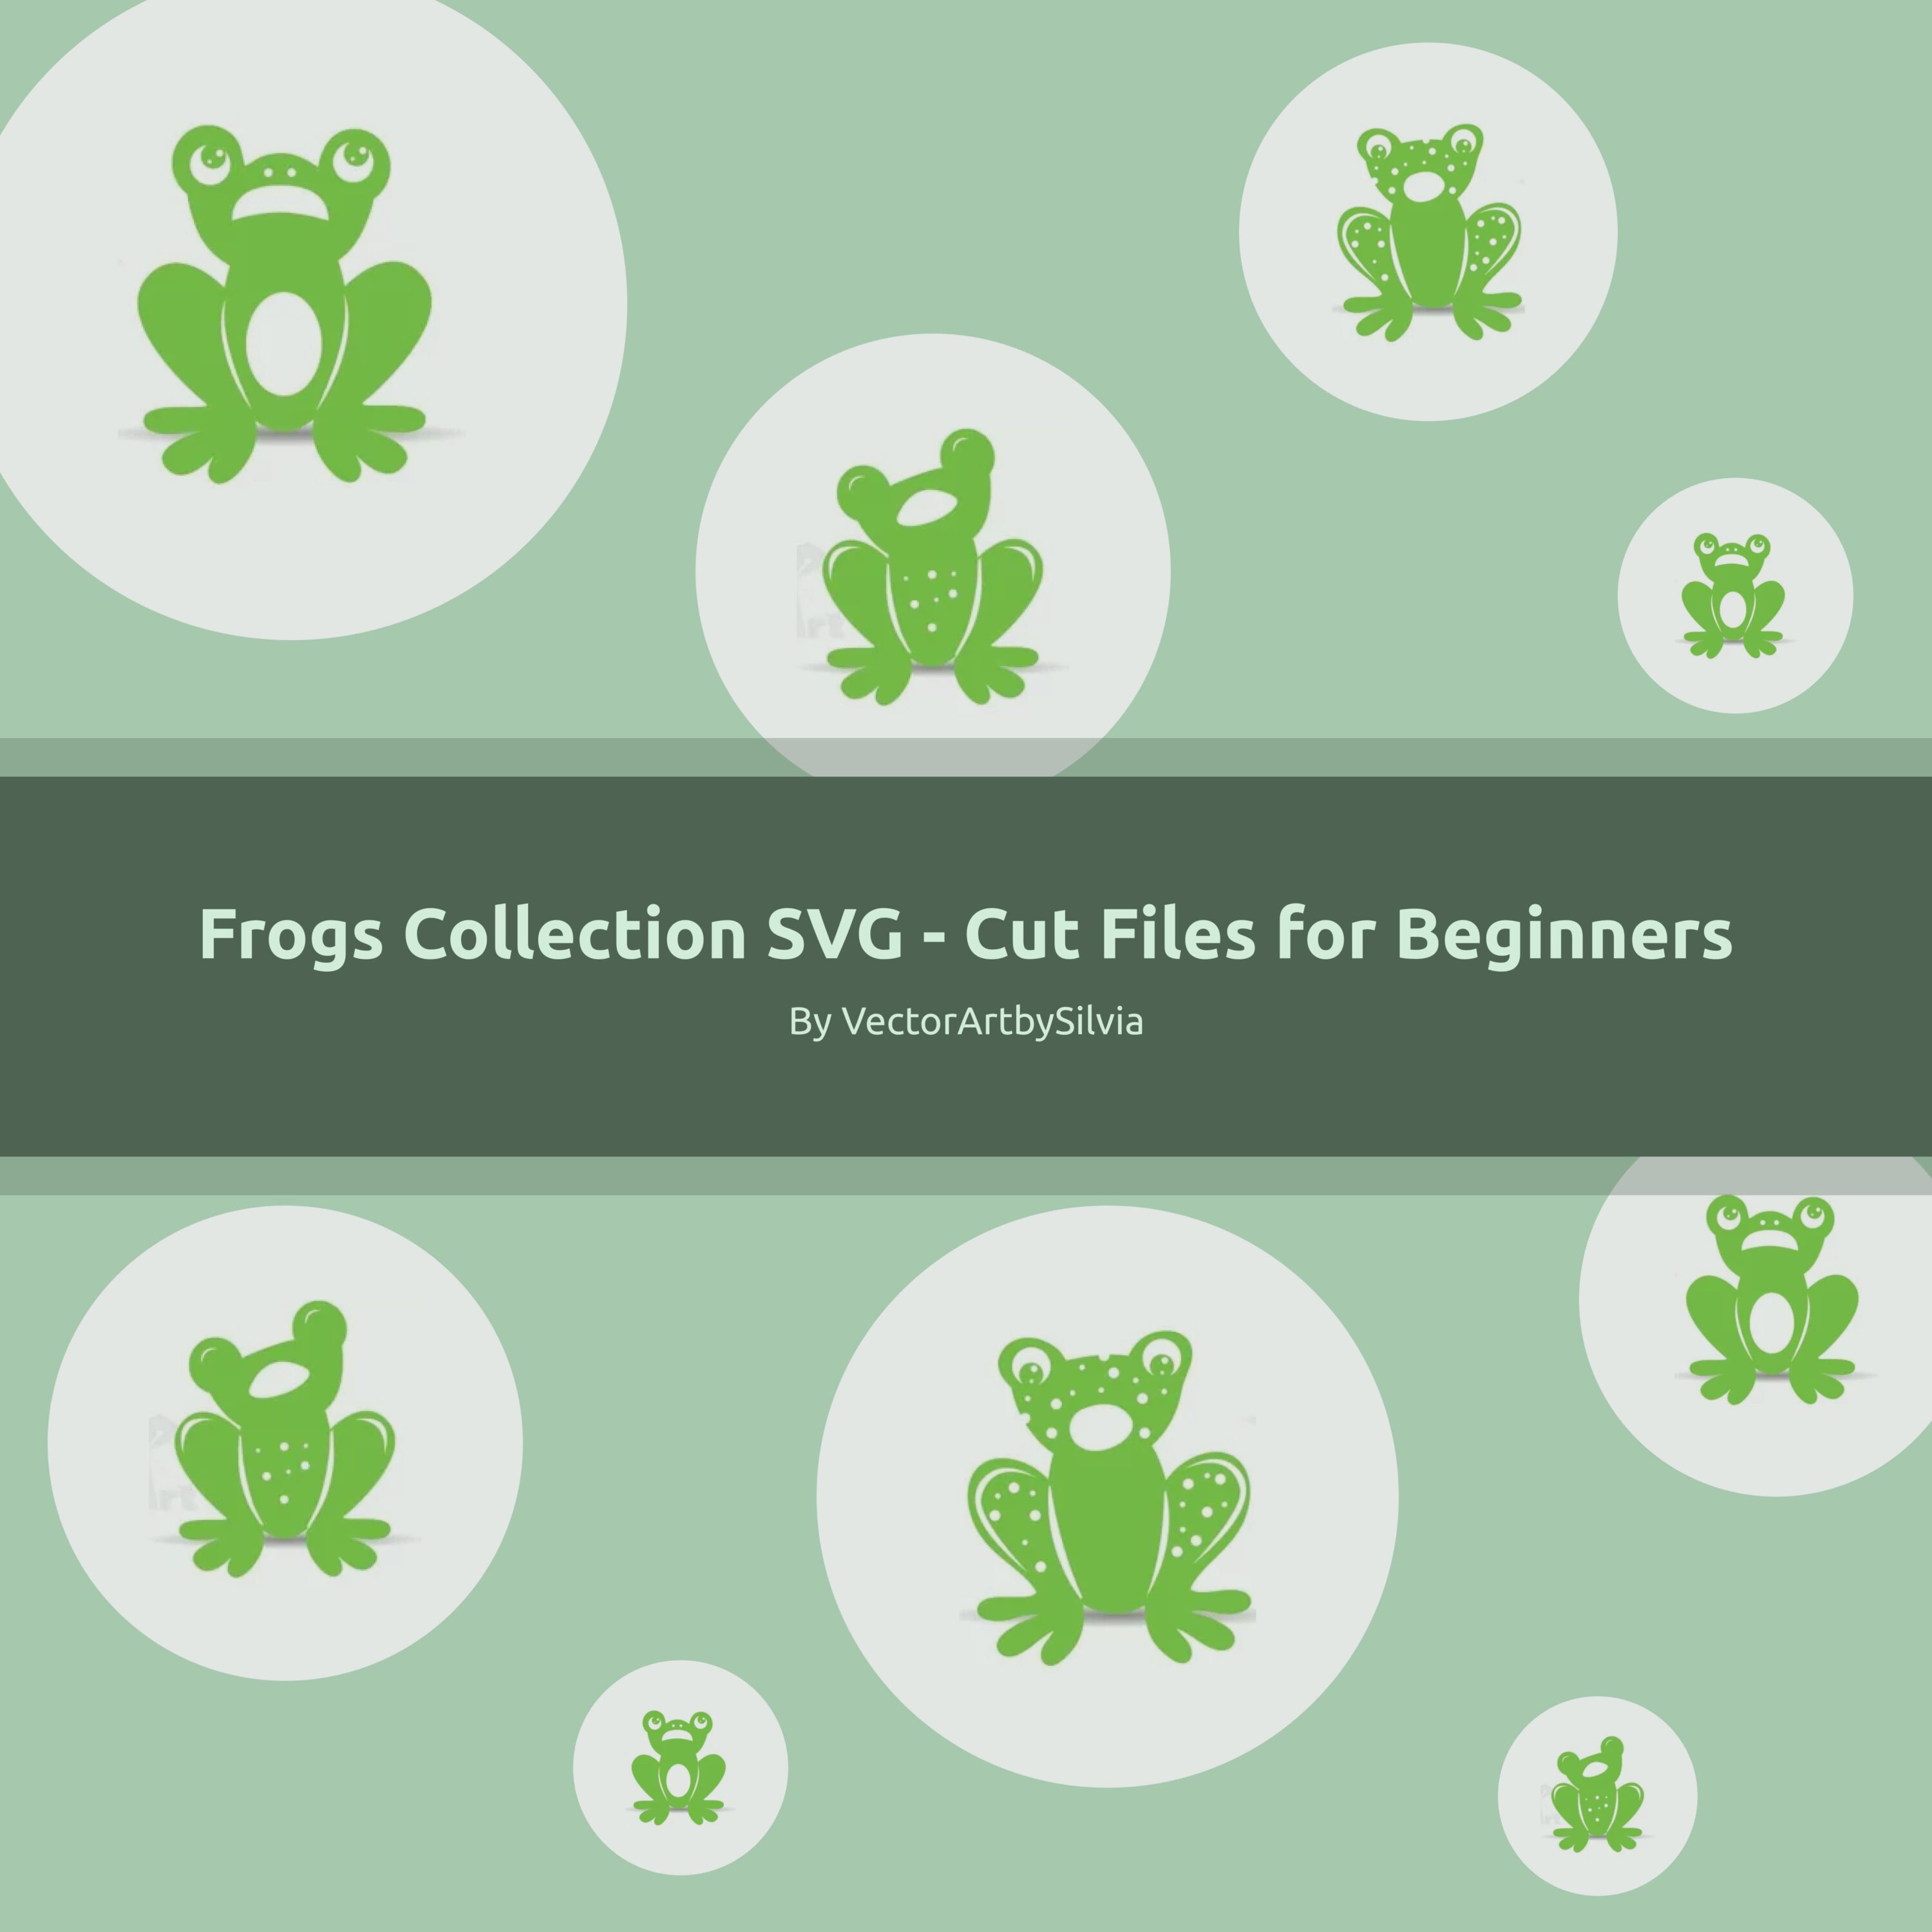 Frogs collection svg - cut files for beginners.